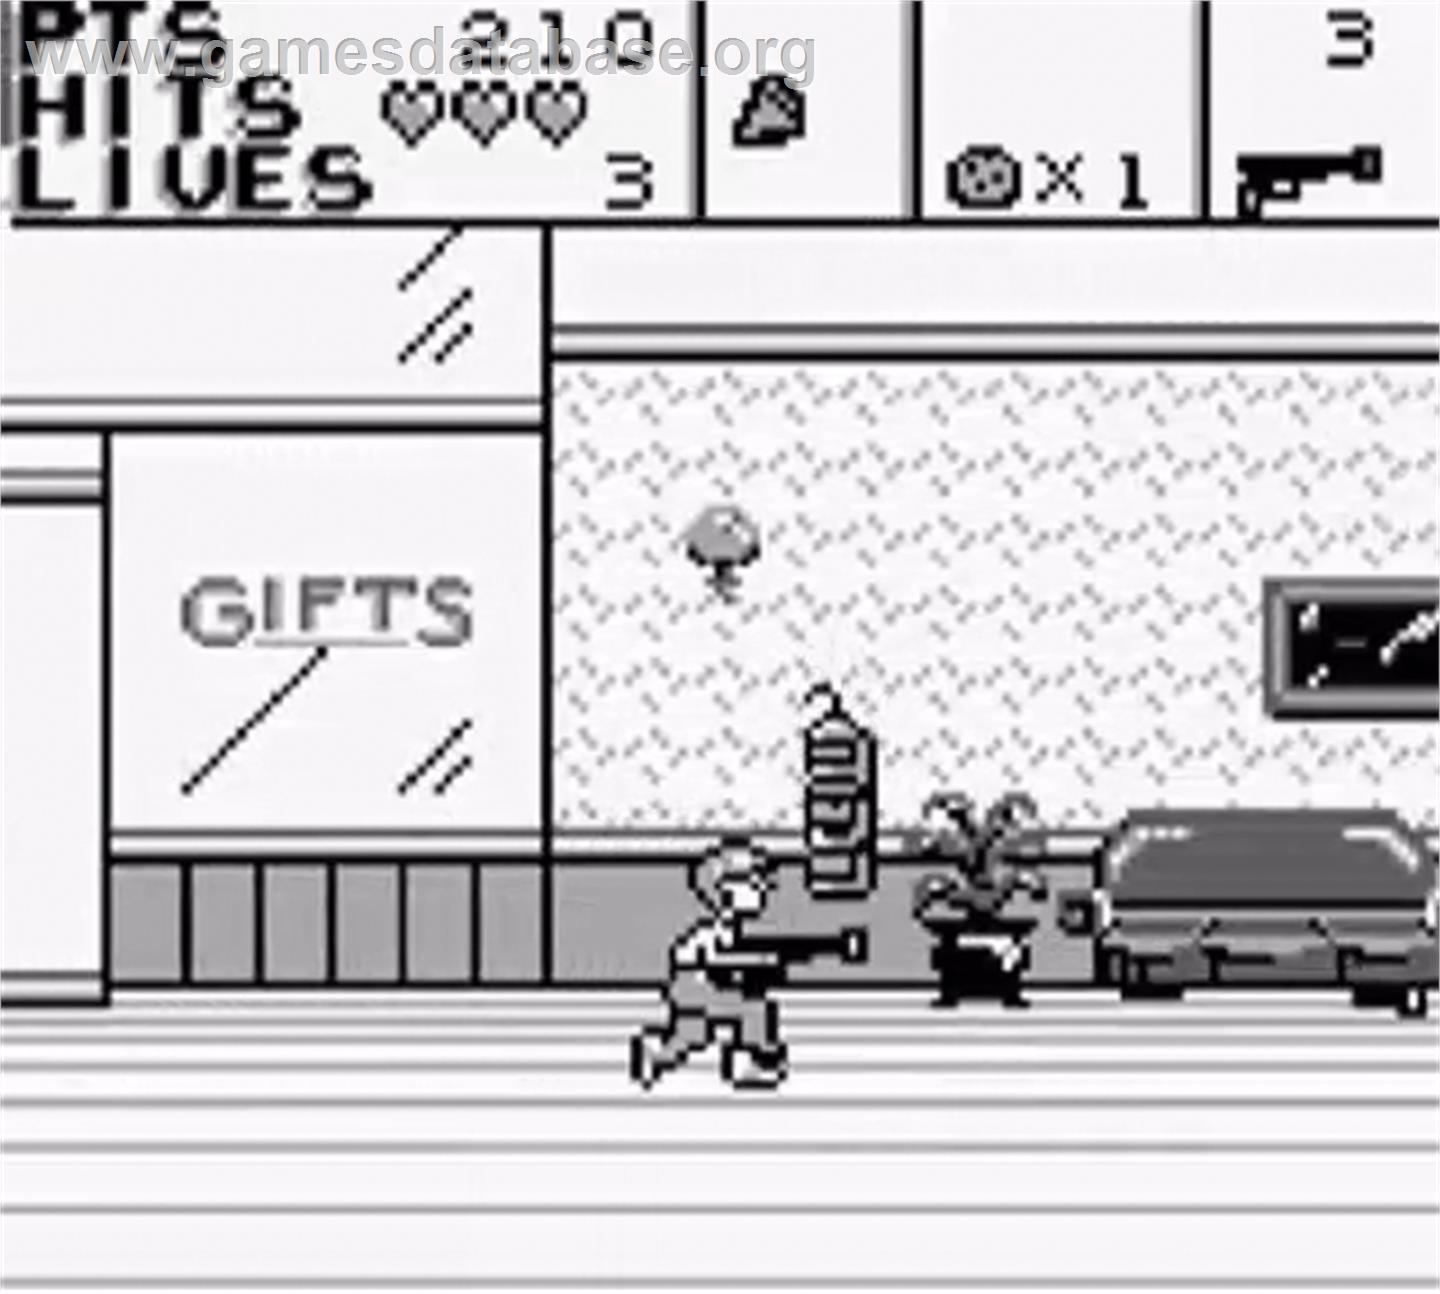 Home Alone 2: Lost in New York - Nintendo Game Boy - Artwork - In Game